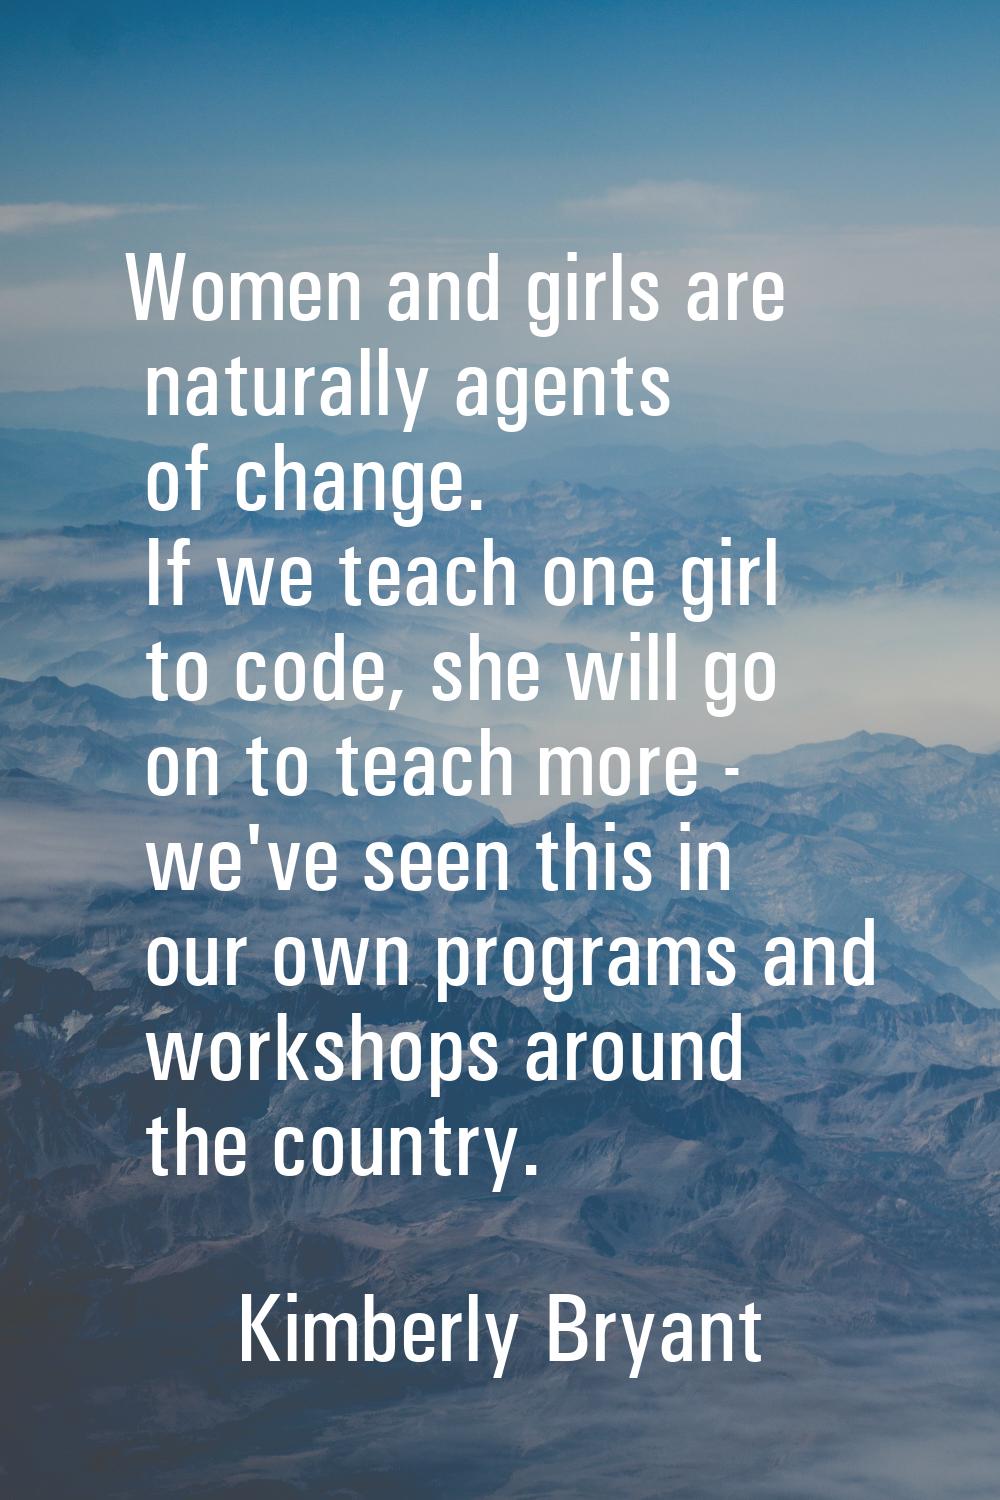 Women and girls are naturally agents of change. If we teach one girl to code, she will go on to tea